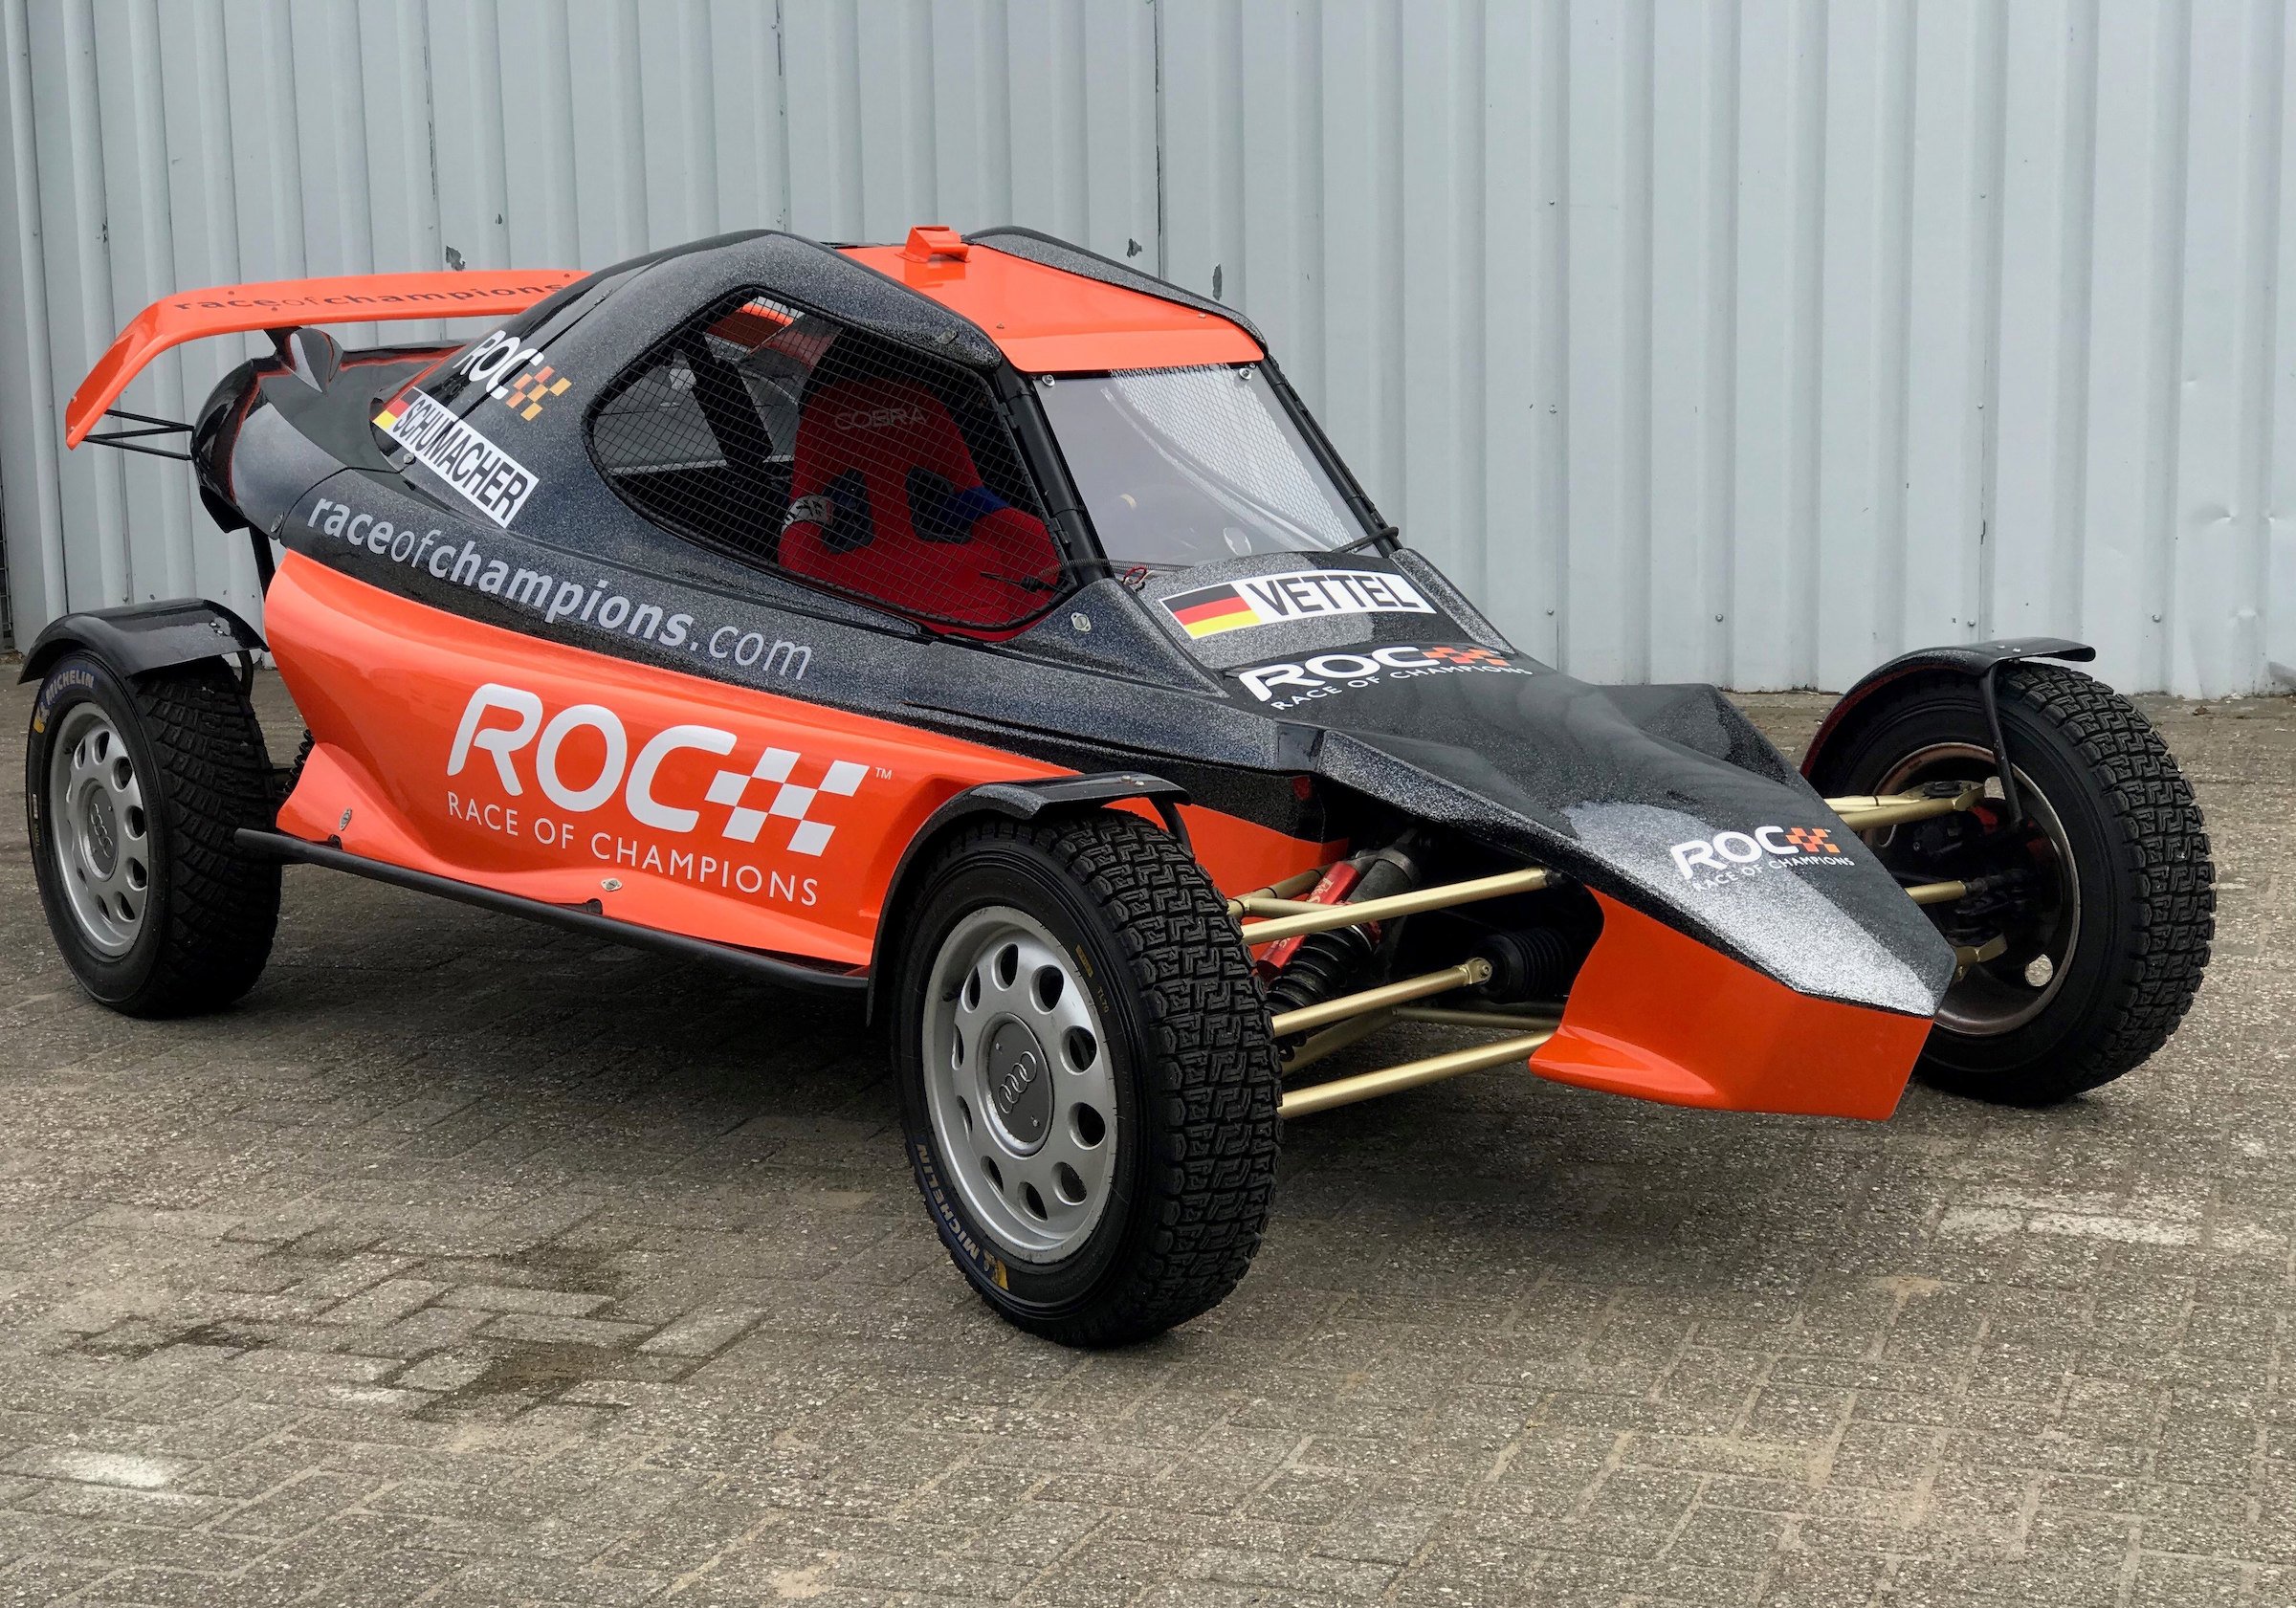 For Sale: Race of Champions Buggy Driven By Michael Schumacher Sebastian